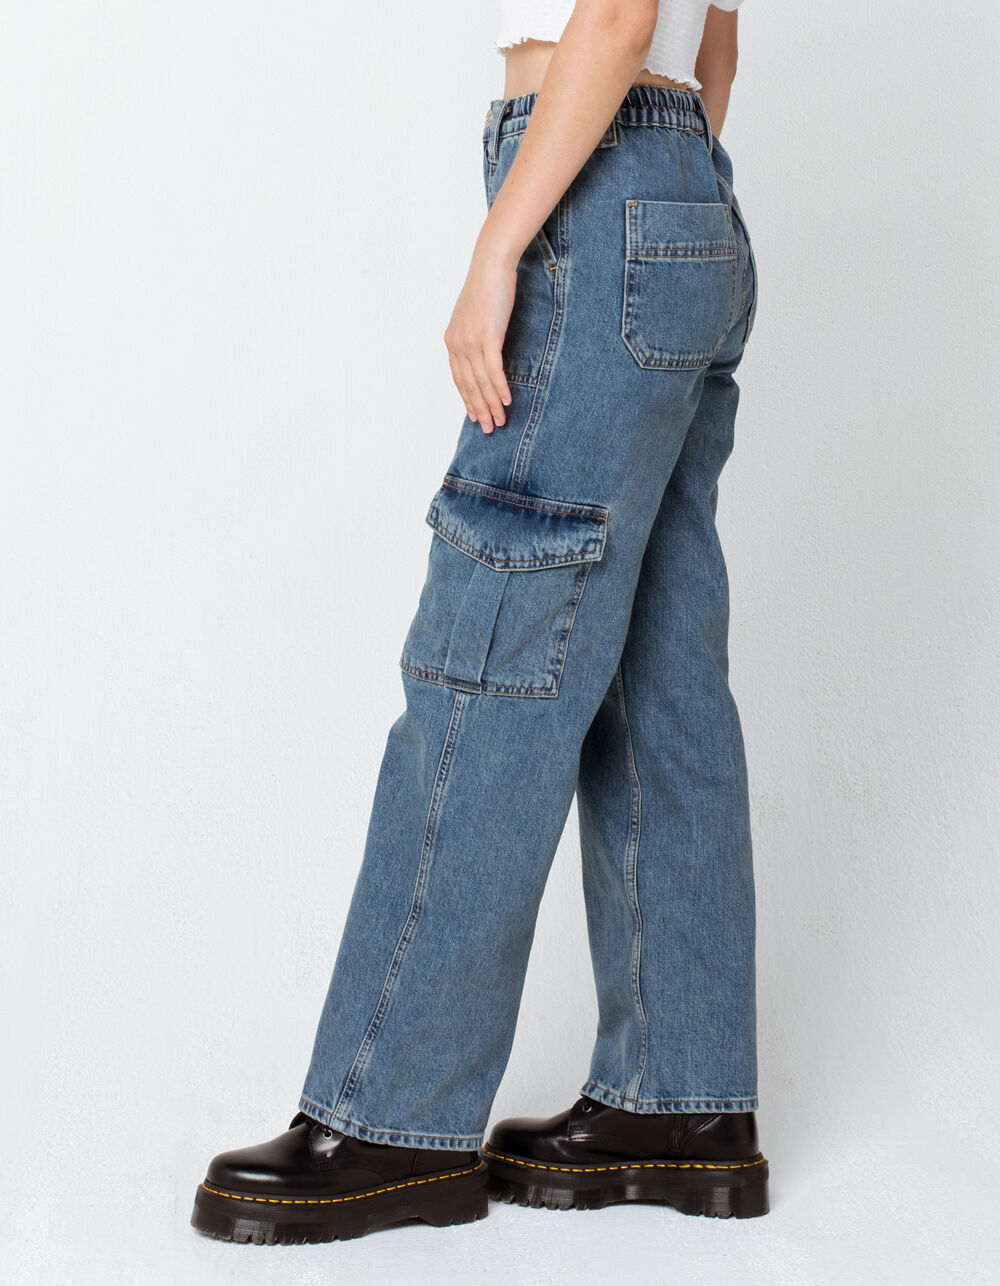 BDG Urban Outfitters Elastic Skate Womens Jeans